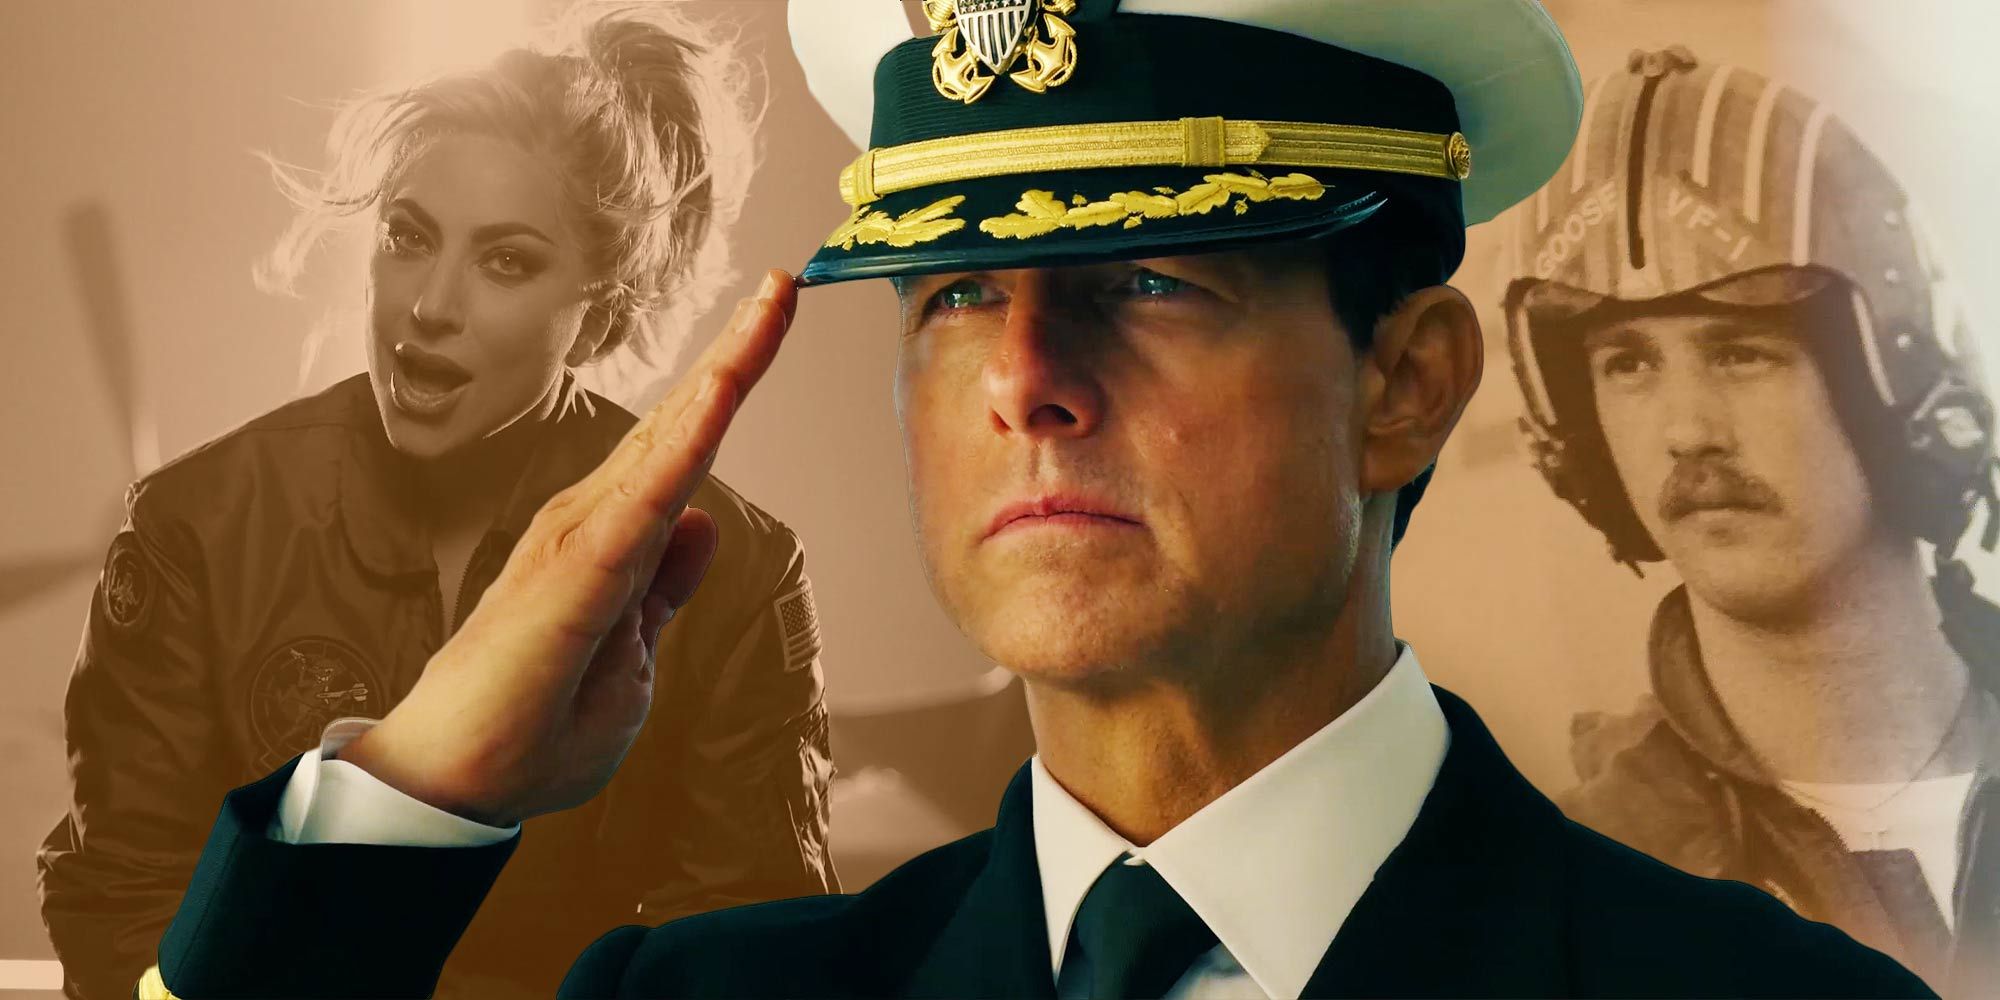 Lady Gaga’s Top Gun 2 Music Video Makes Goose’s Death Even More Emotional